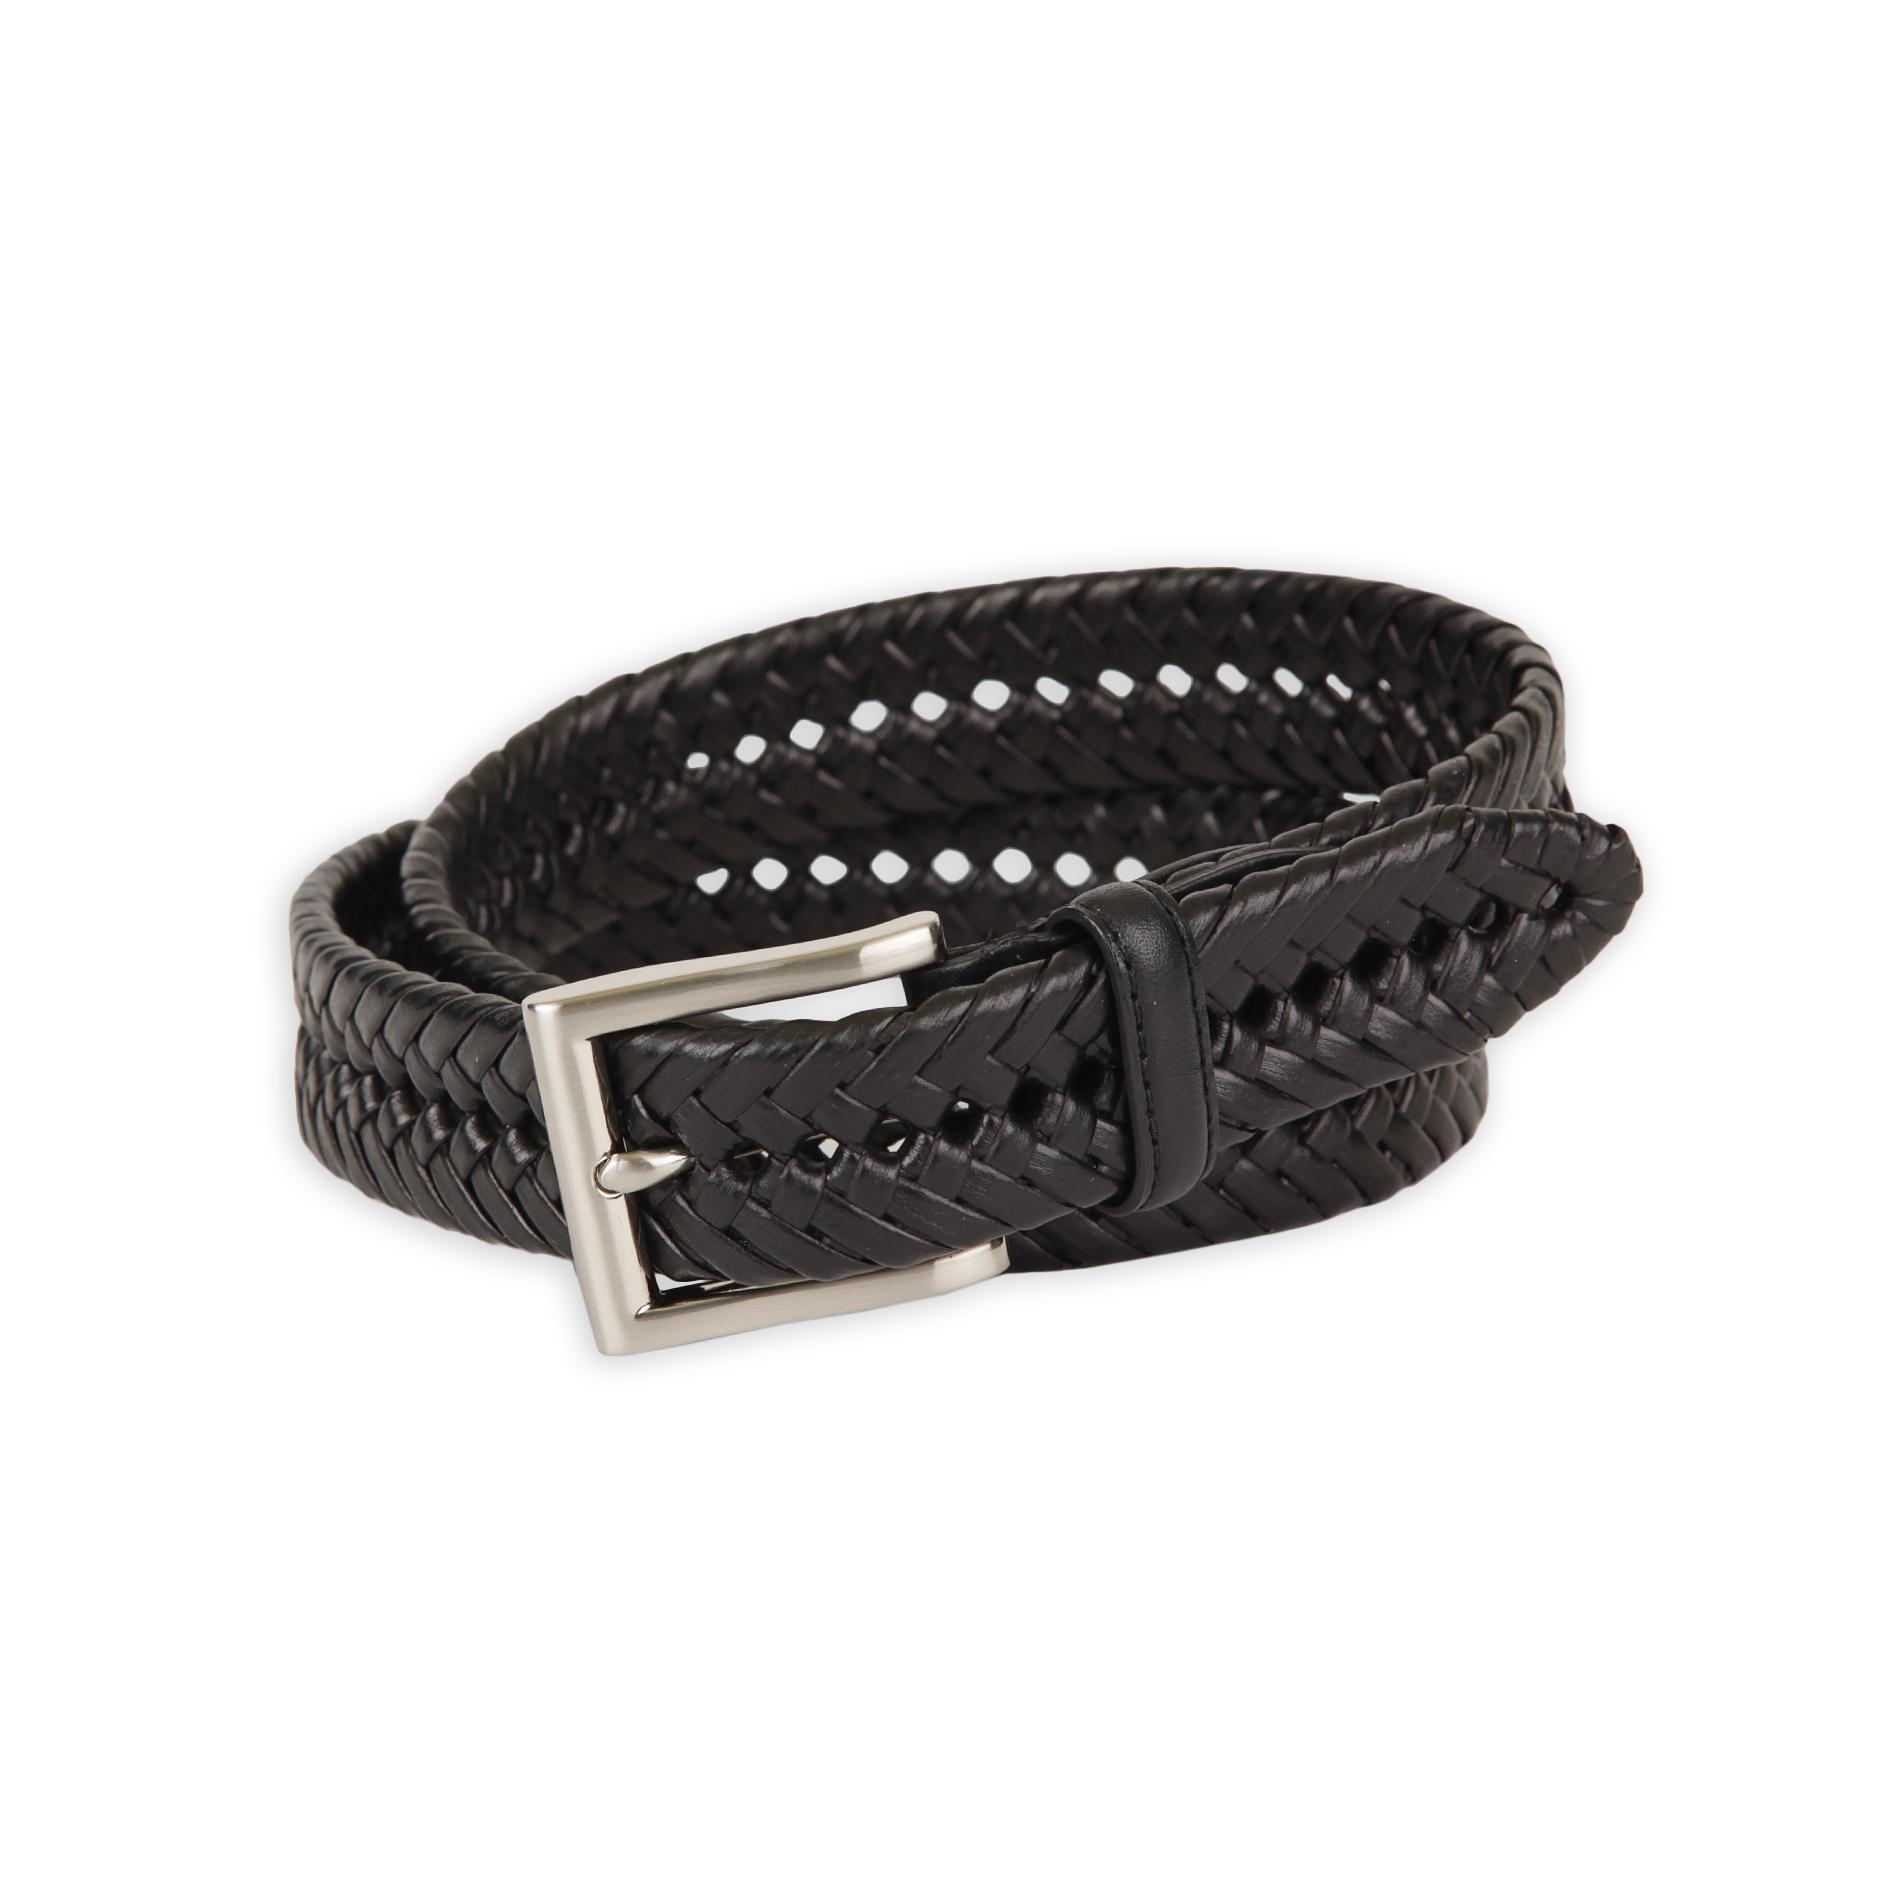 David Taylor Collection Men's Woven Leather Belt